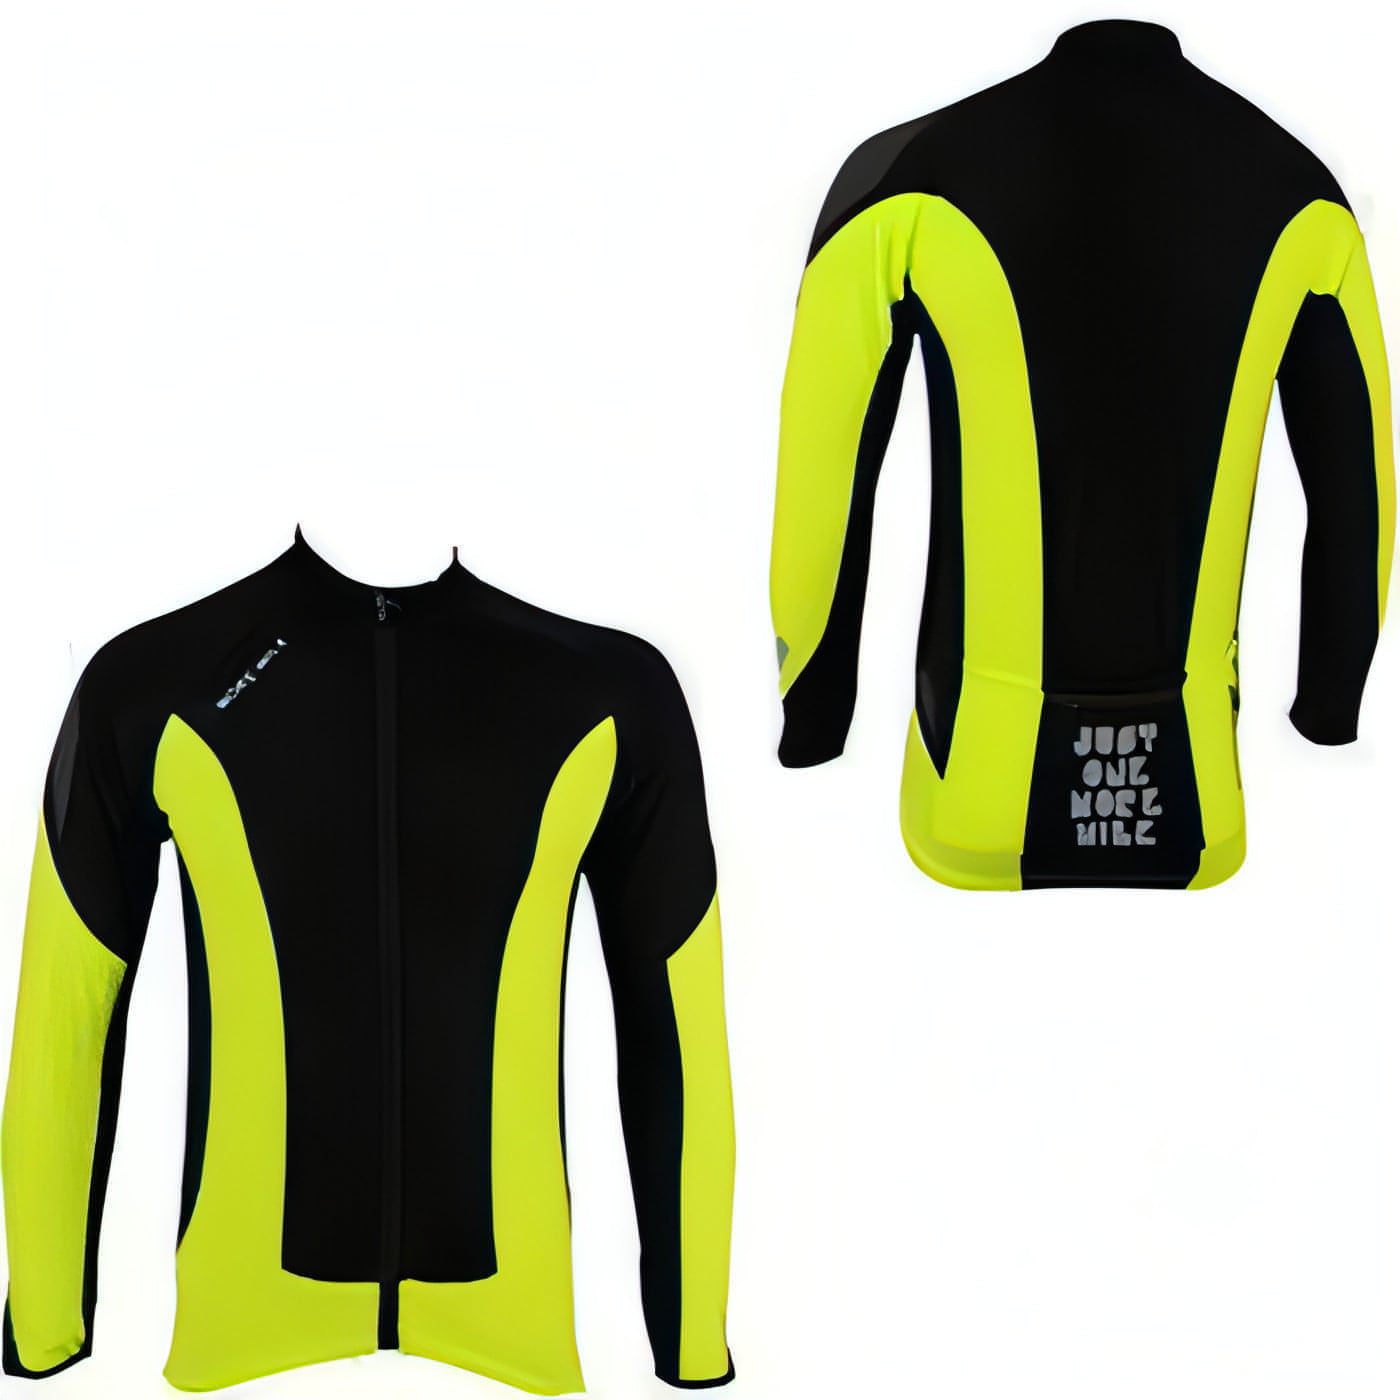 More Mile Thermal Long Sleeve Junior Cycle Jersey - Yellow 5055604328345 - Start Fitness